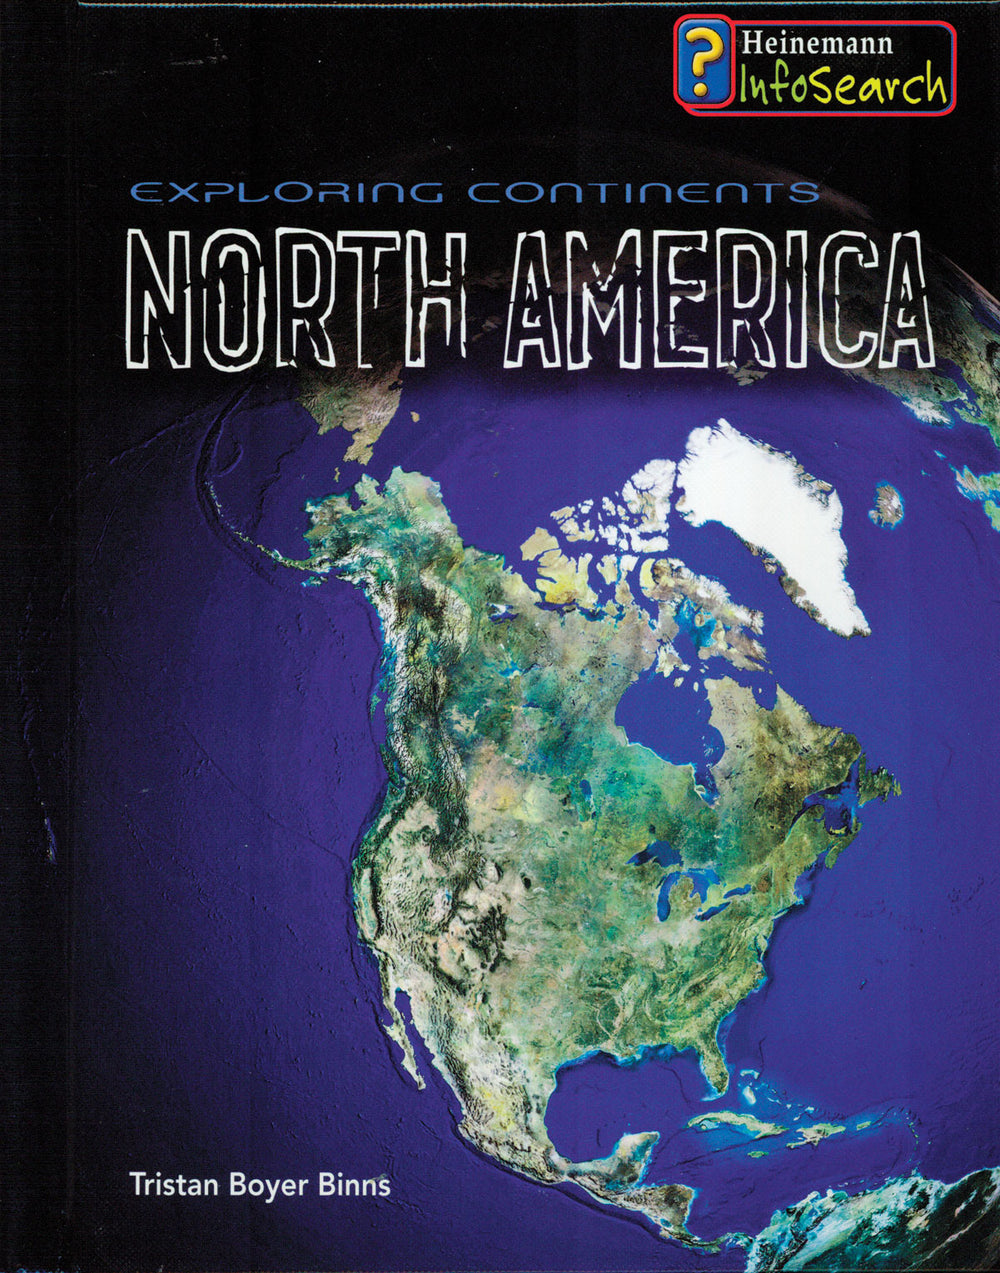 voyage of the continents north america